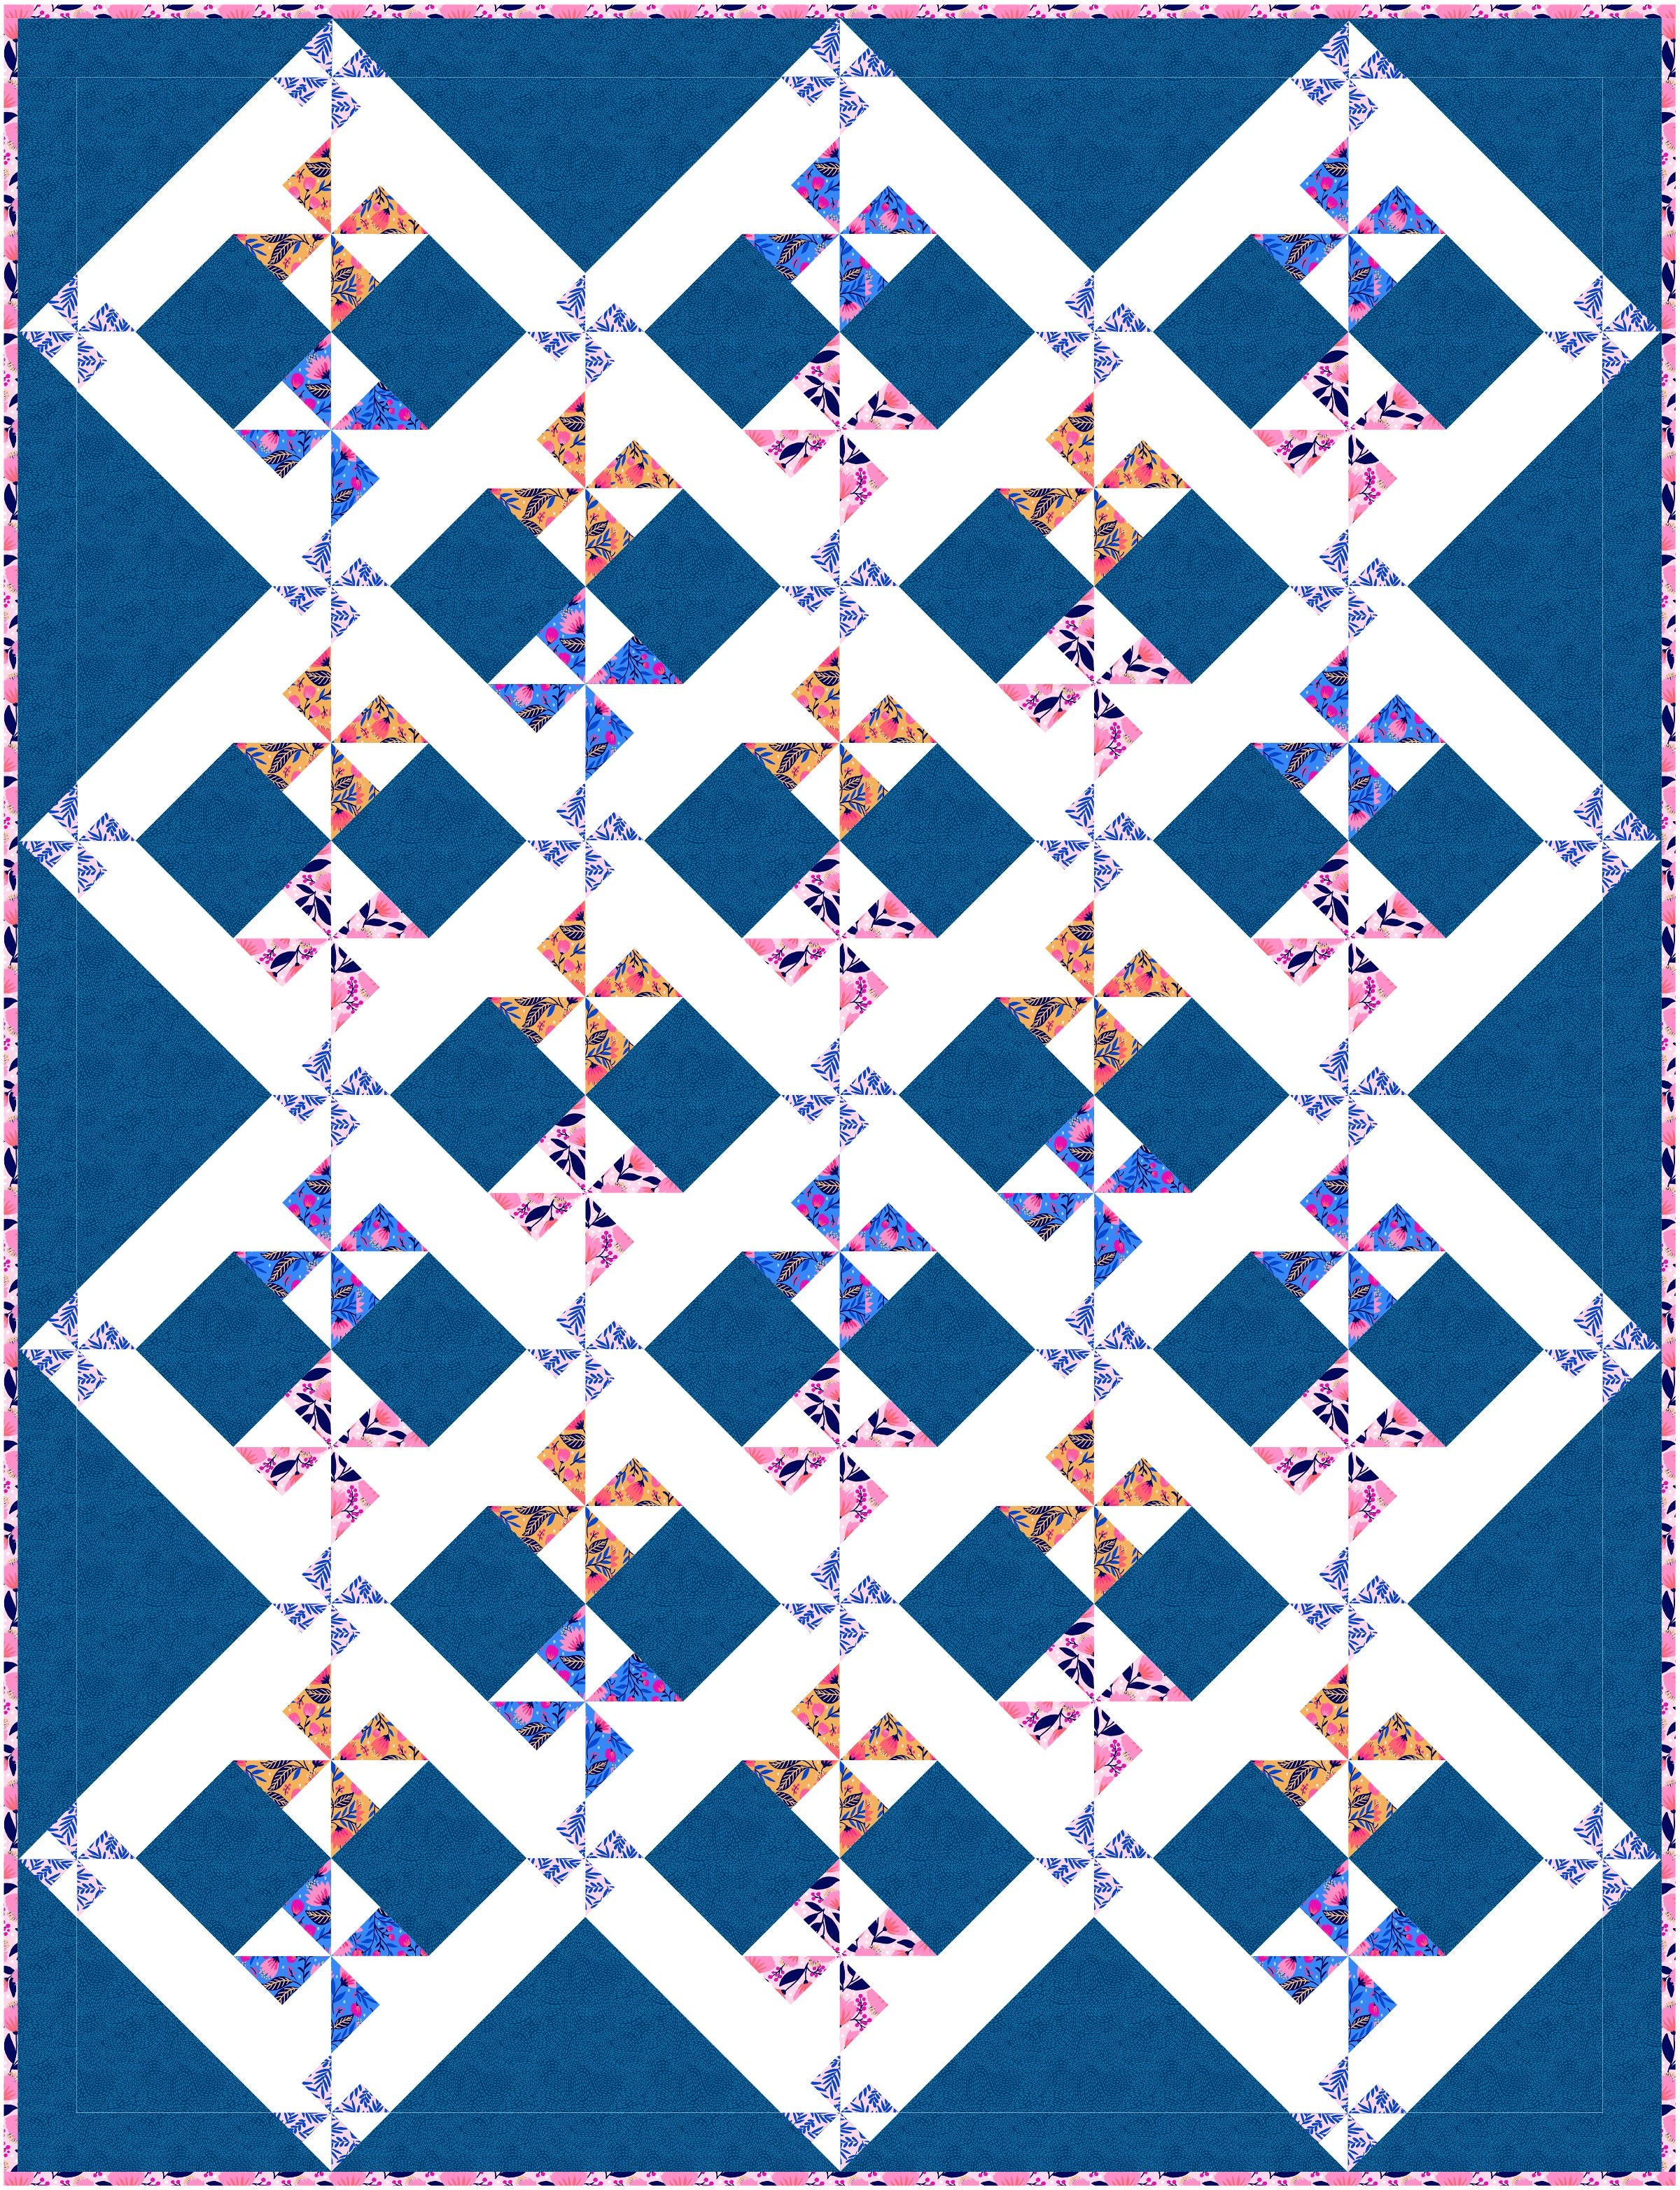 Quilt Pattern - Windy Day By Center Street Quilts